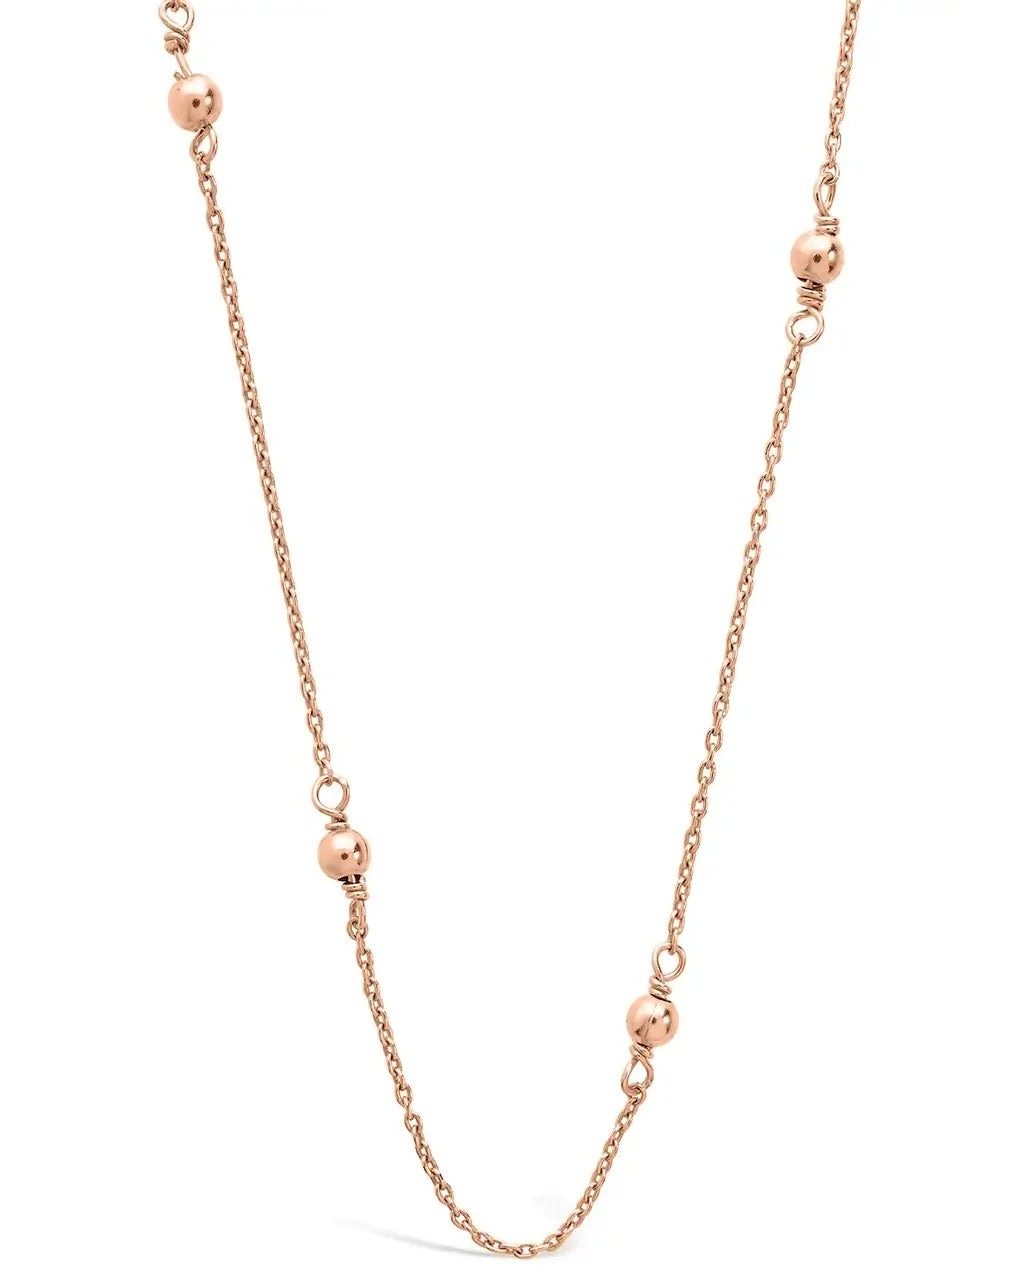 Sterling Silver Beaded Necklace Necklace Sterling Forever Rose Gold 